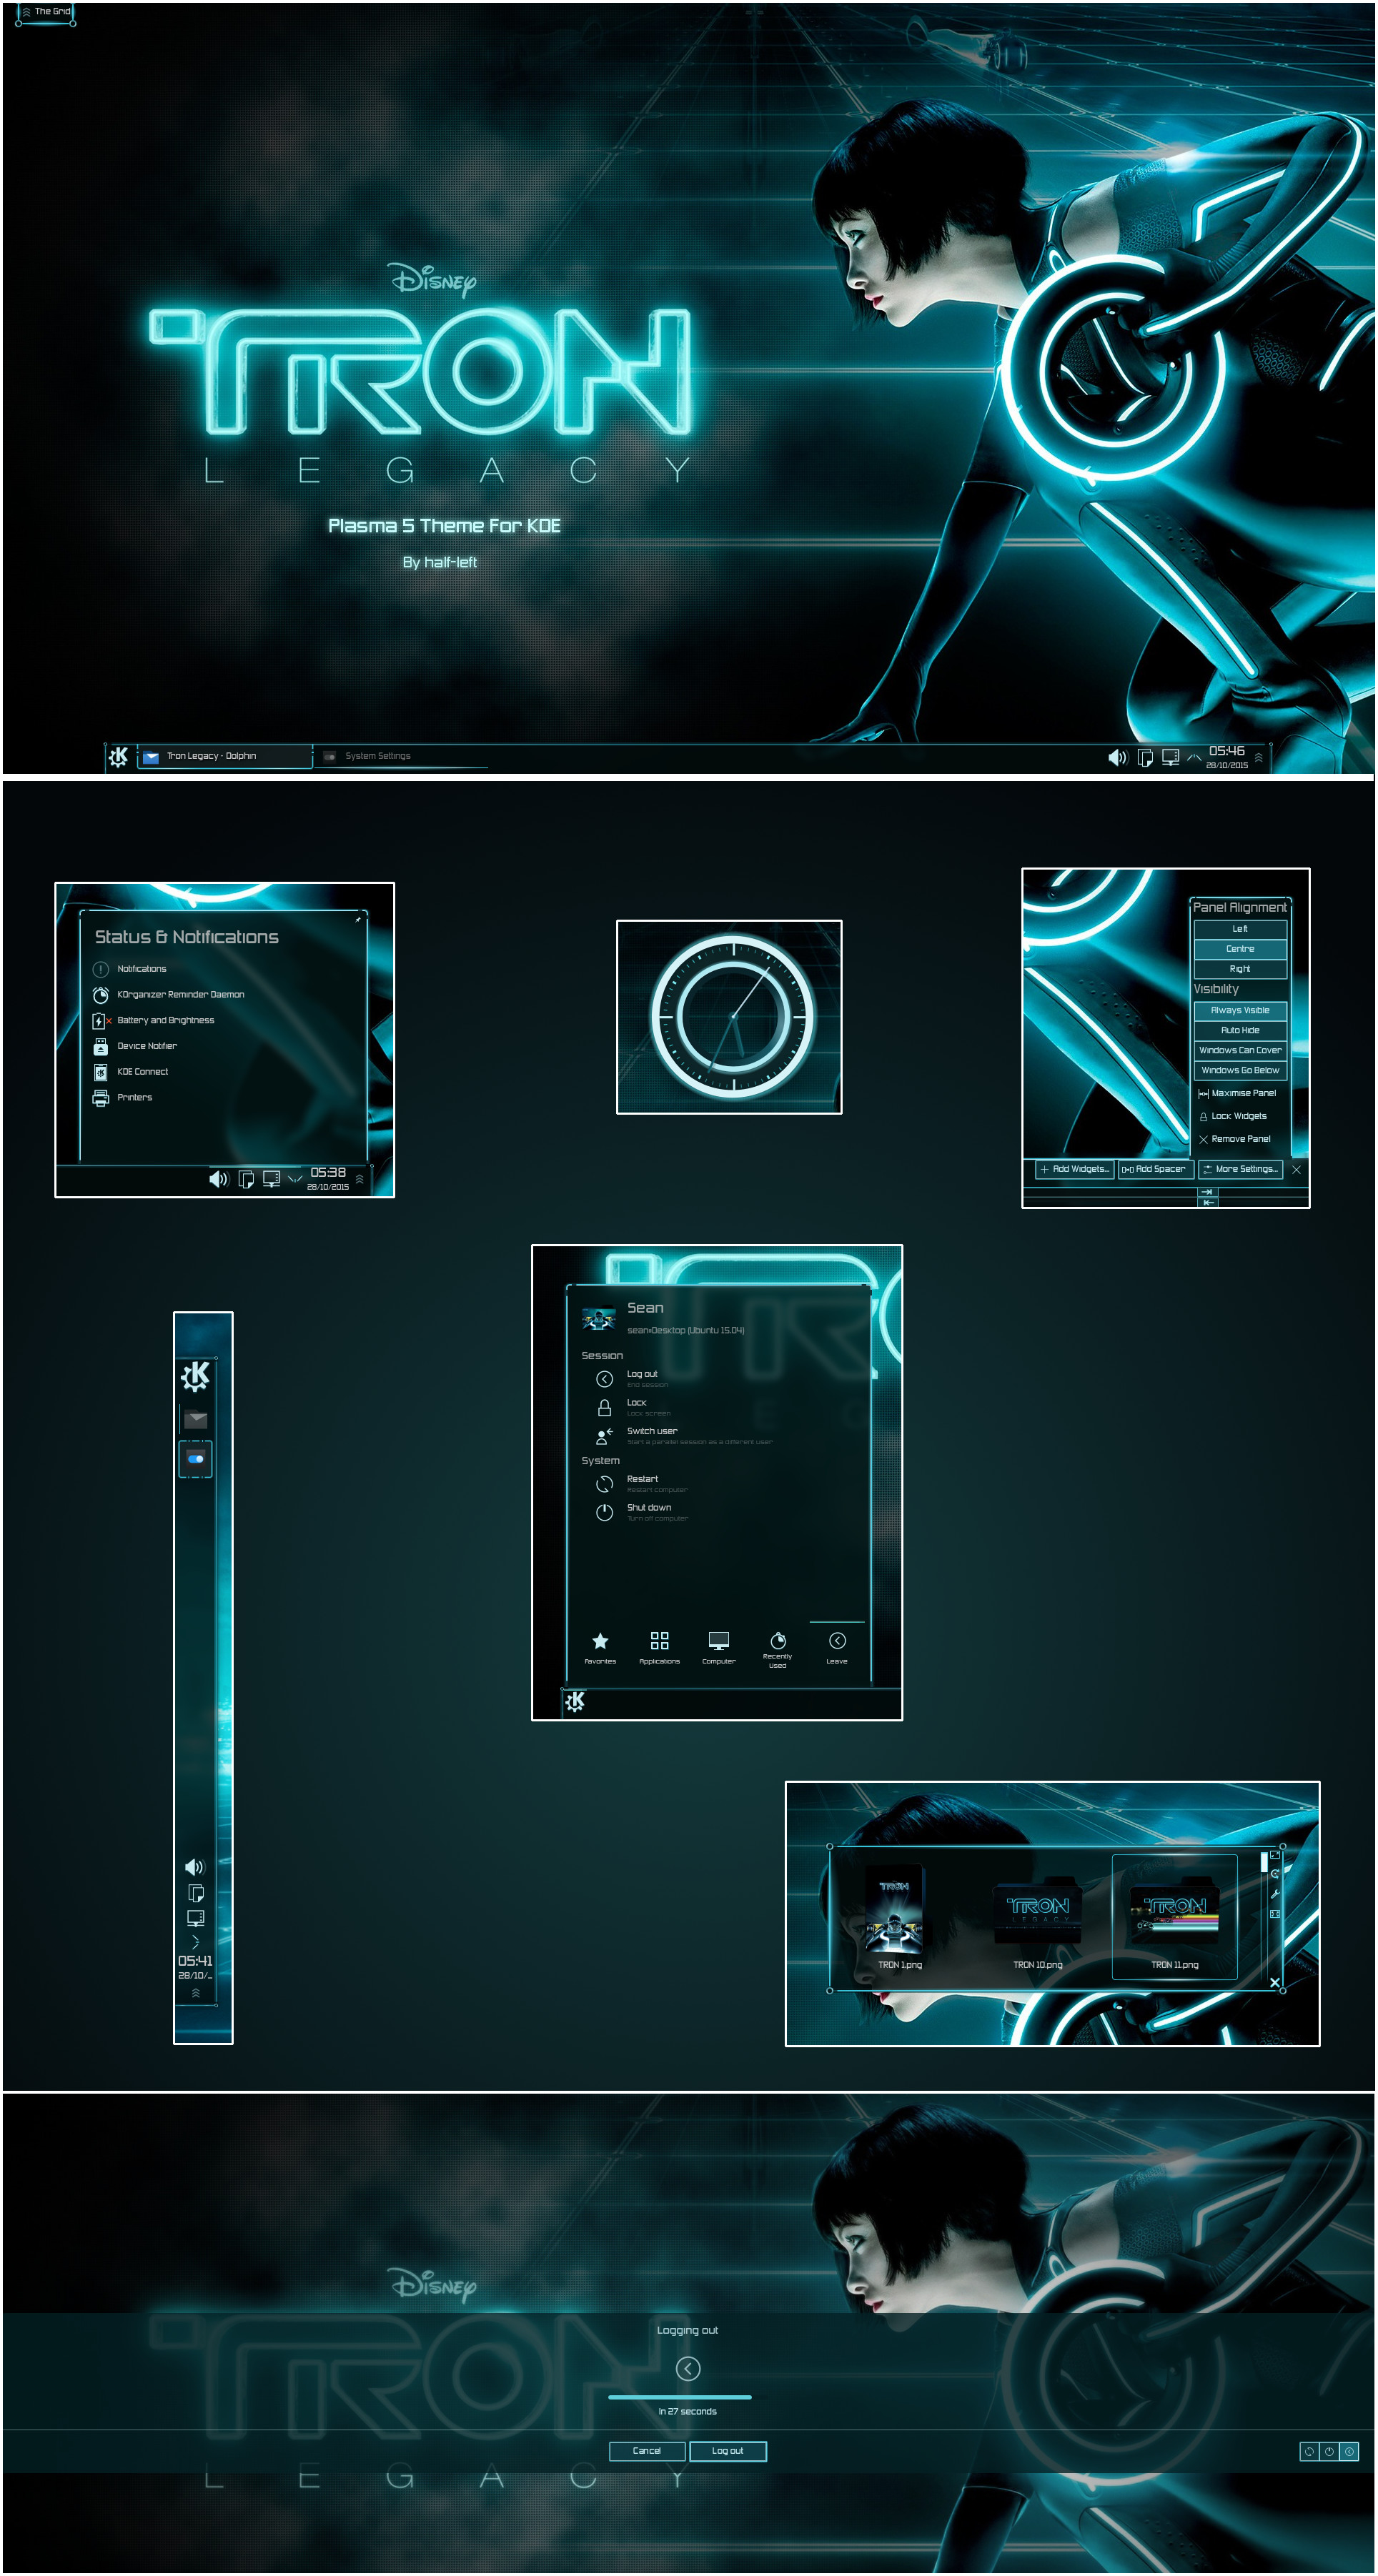 1928x3605 Tron Legacy For Plasma 5 by half-left theme wallpaper icons symbols logo  website software game user interface gui ui | Create your own roleplaying  game ...